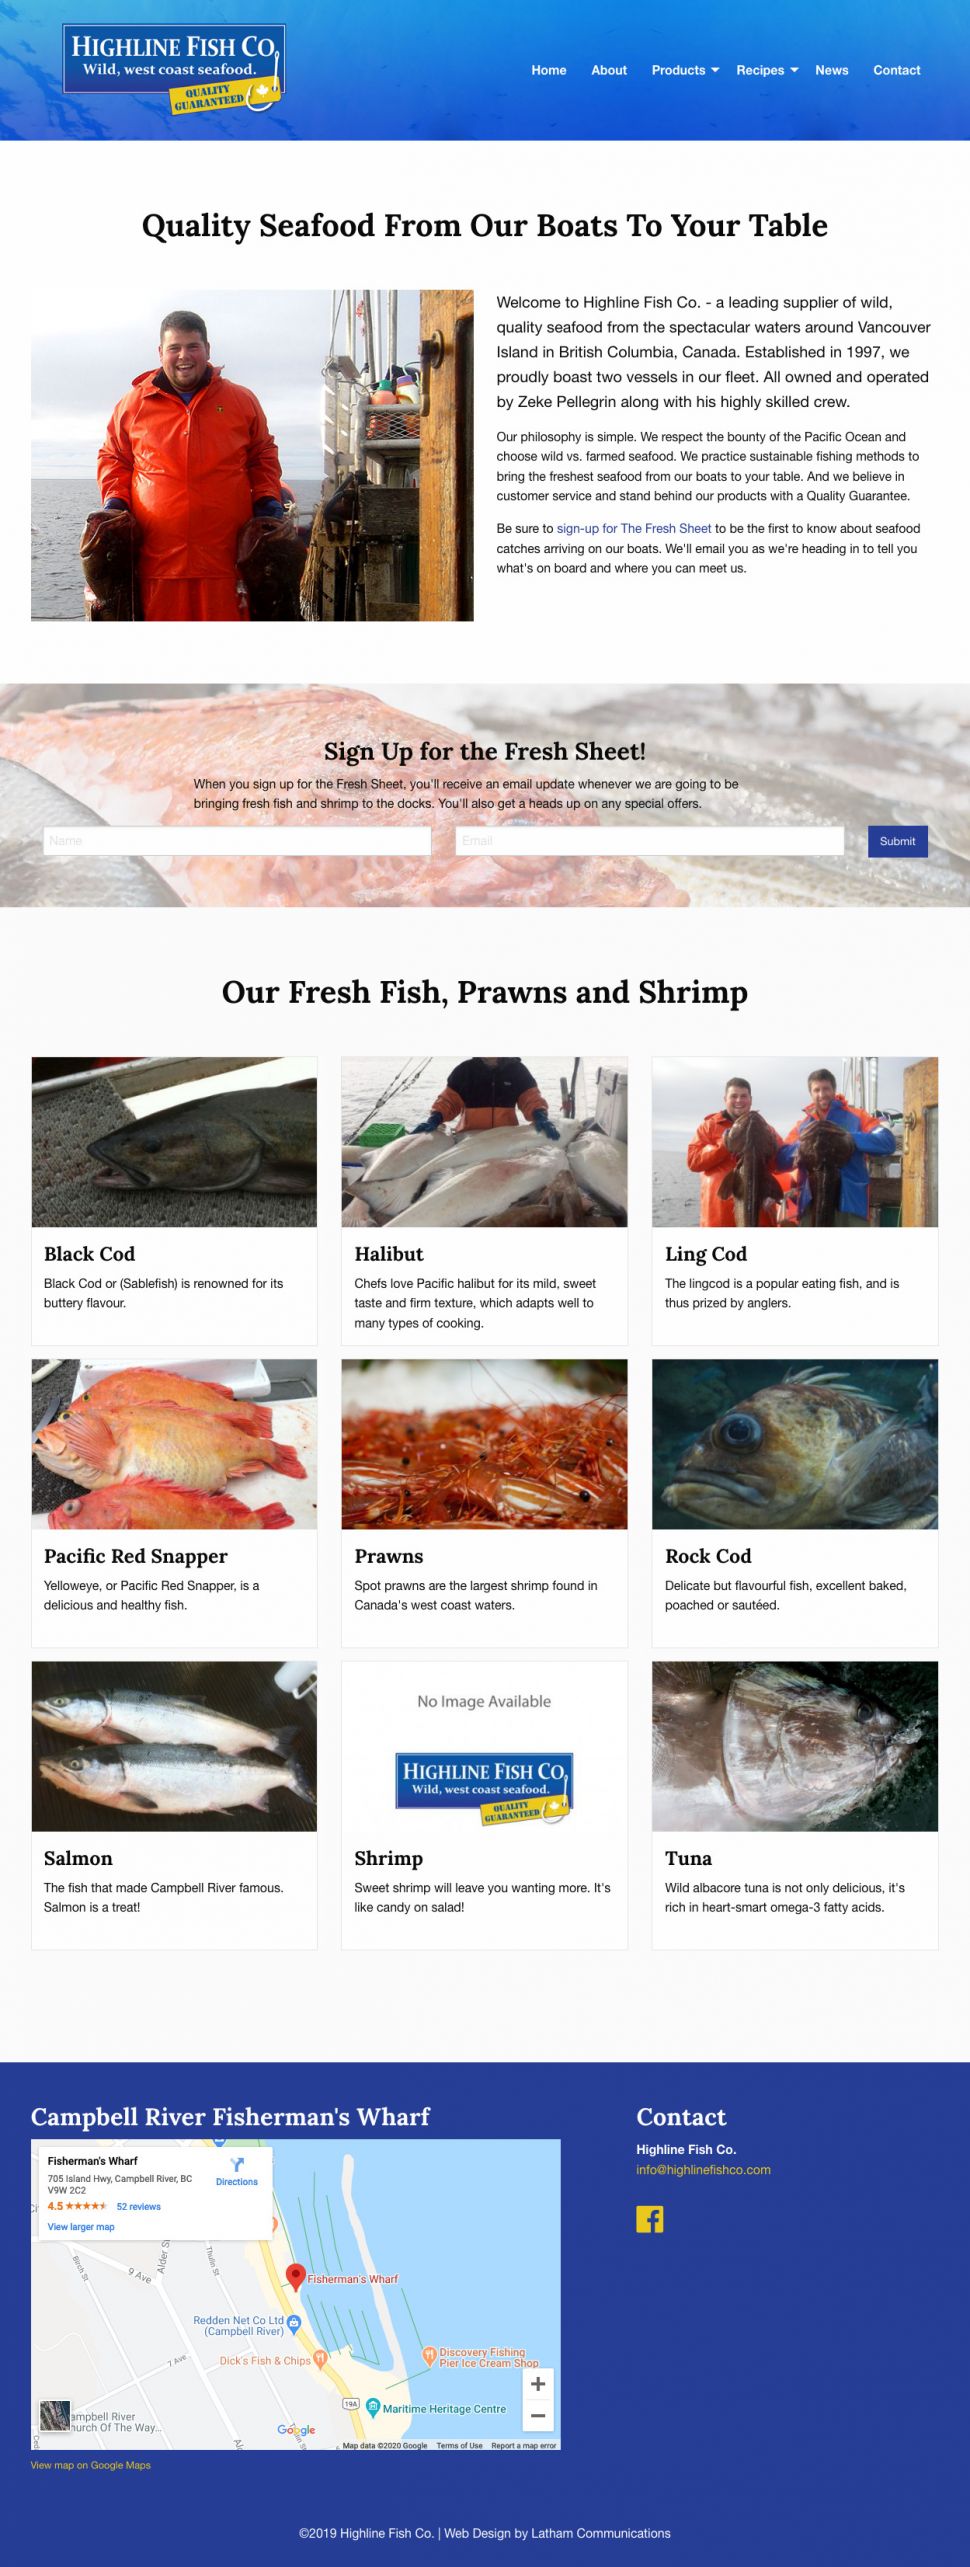 Screenshot of Highline Fish Co website home page.